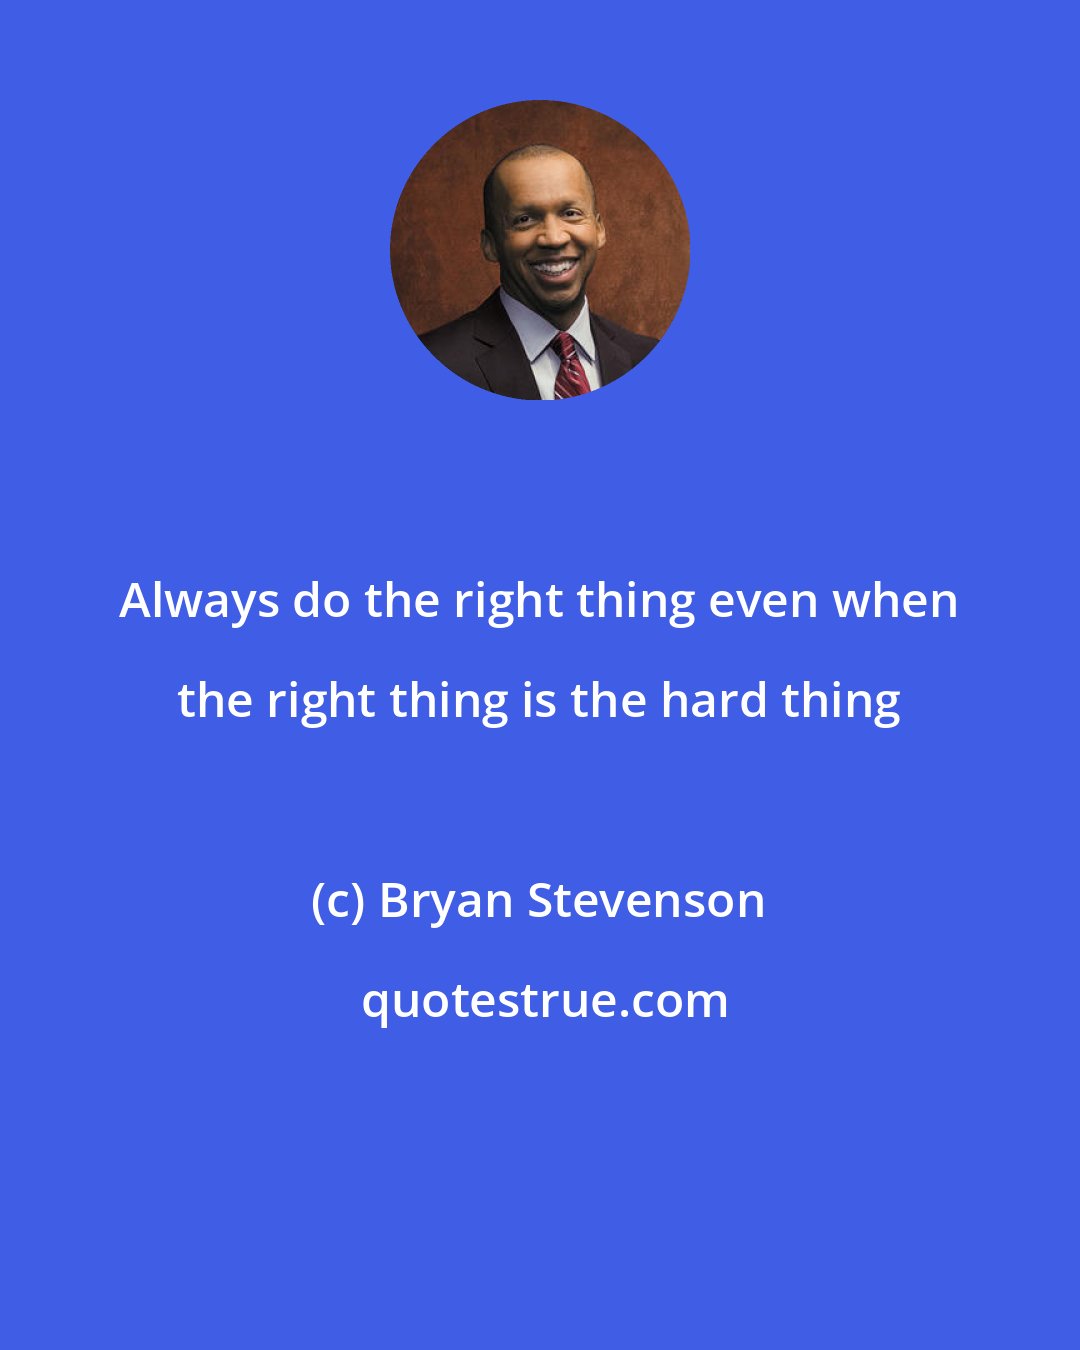 Bryan Stevenson: Always do the right thing even when the right thing is the hard thing